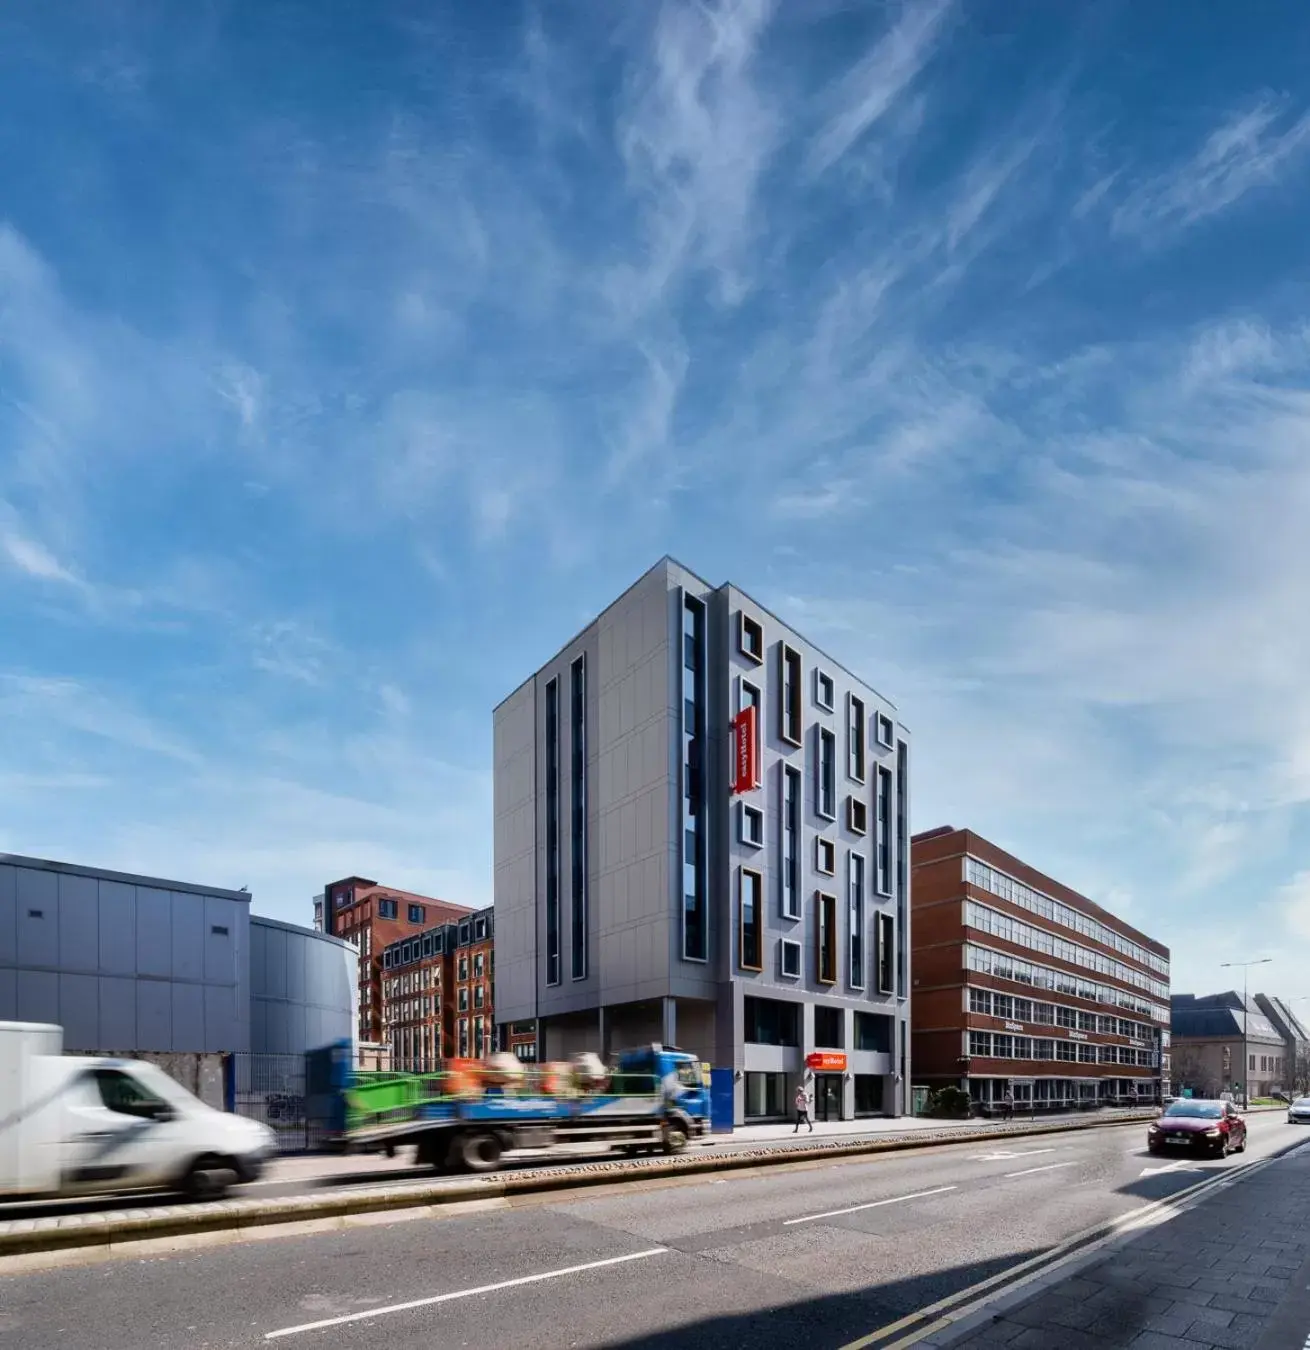 Property building in easyHotel Cardiff